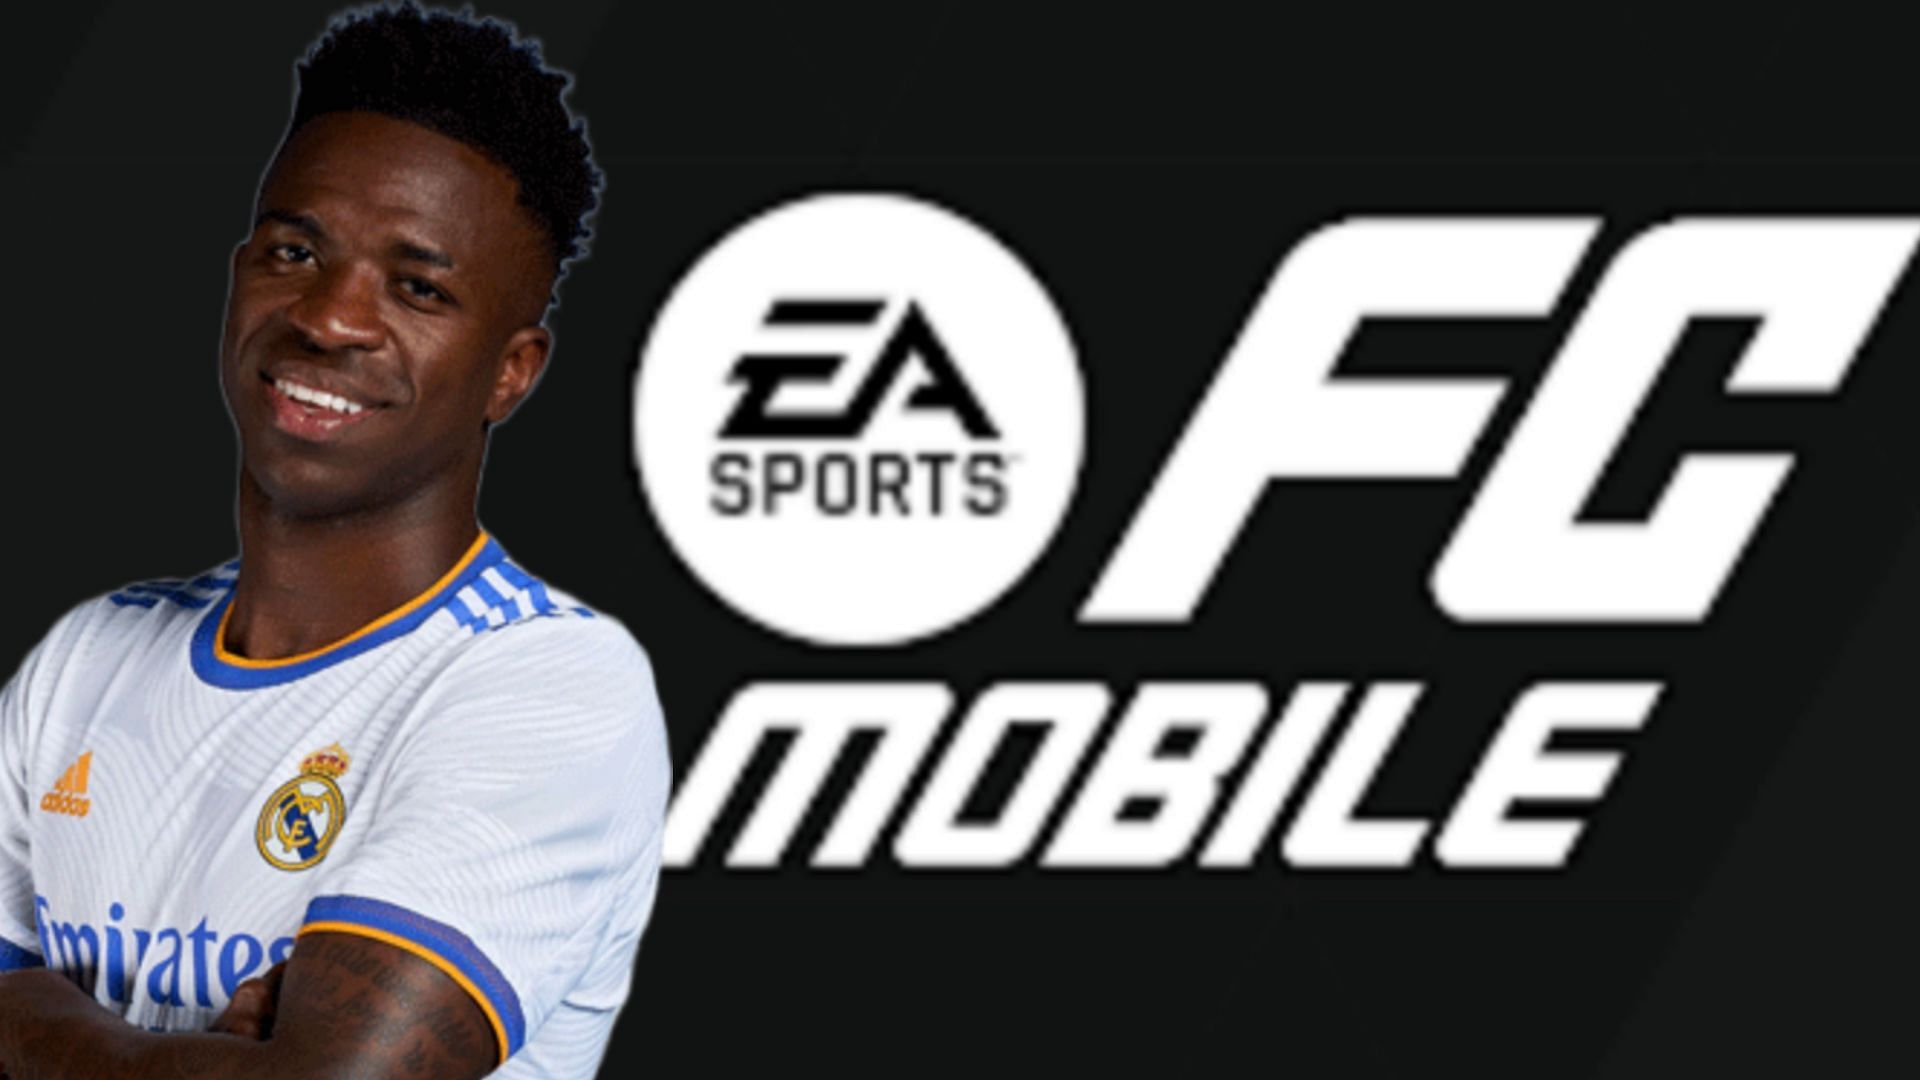 EA SPORTS FC Mobile: Everything We Know and More